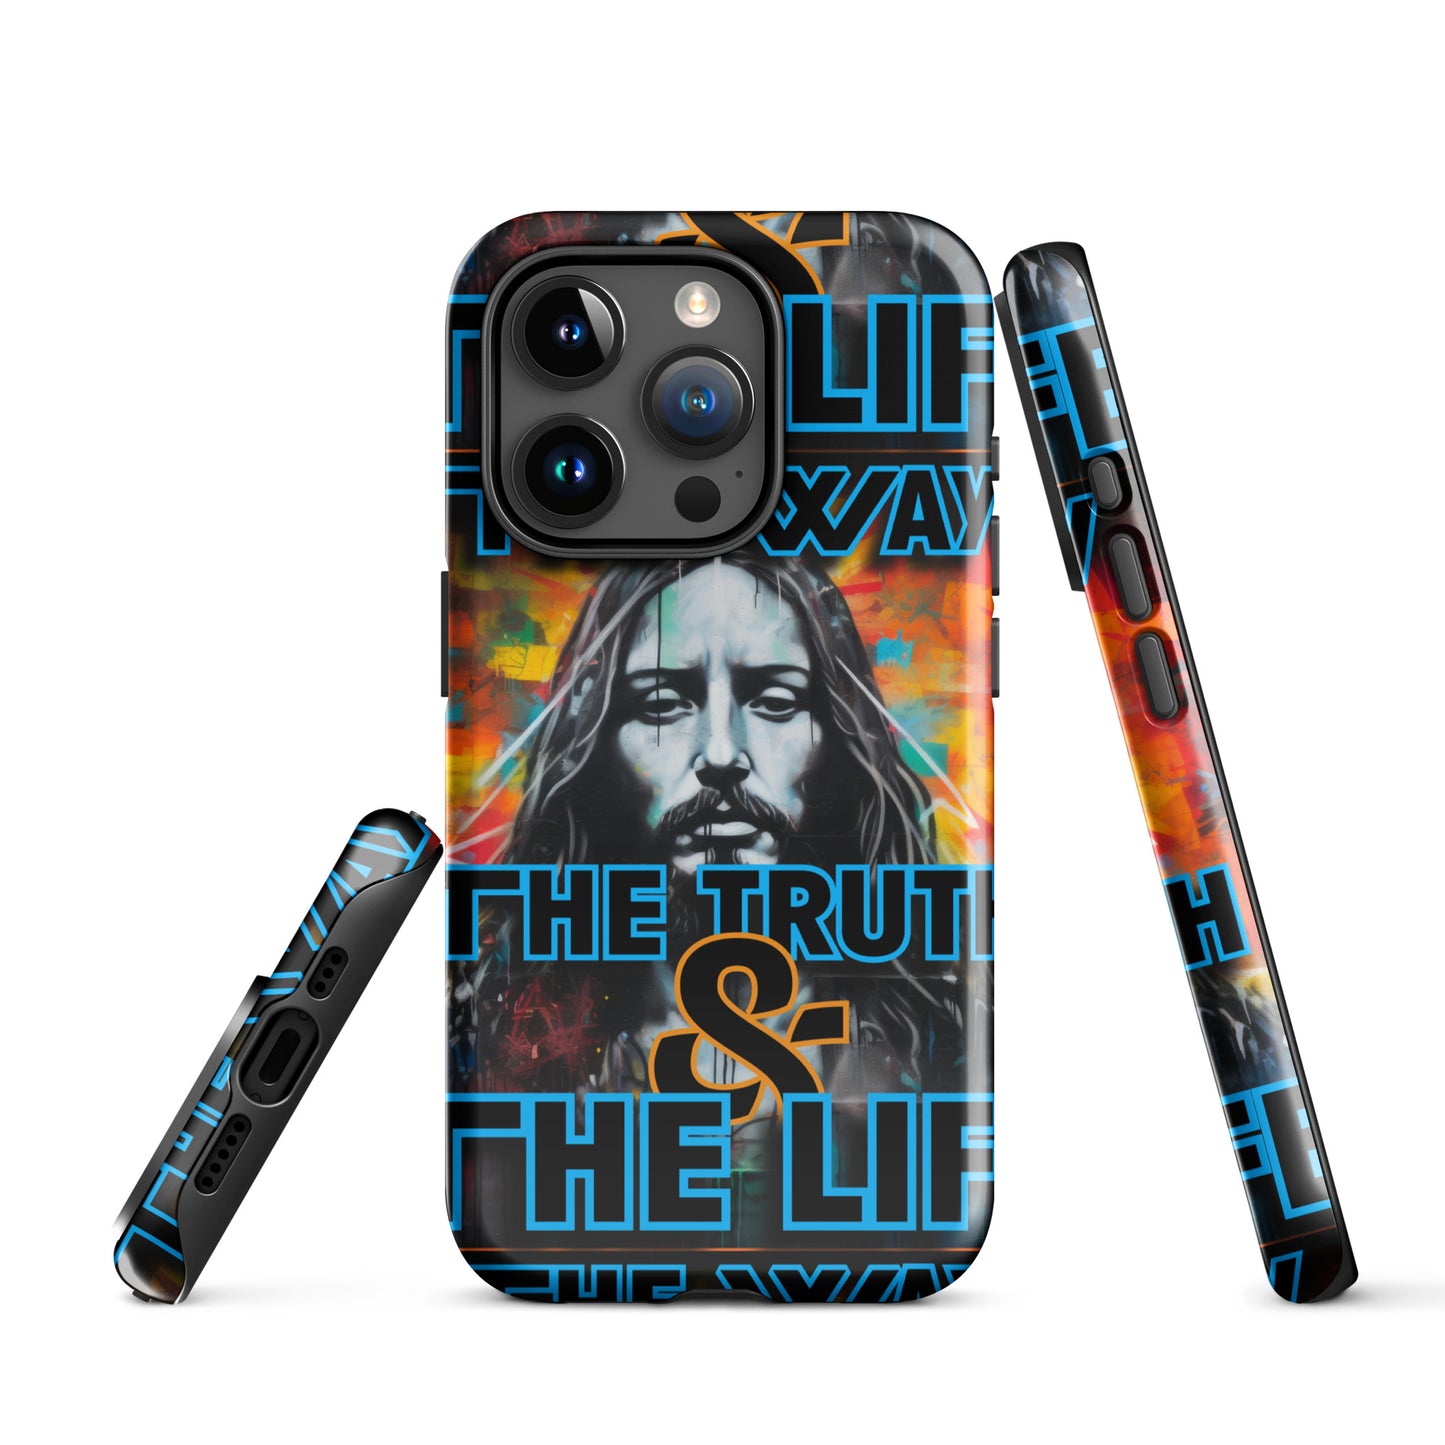 THE WAY, THE TRUTH, & THE LIFE- Tough Case for iPhone®